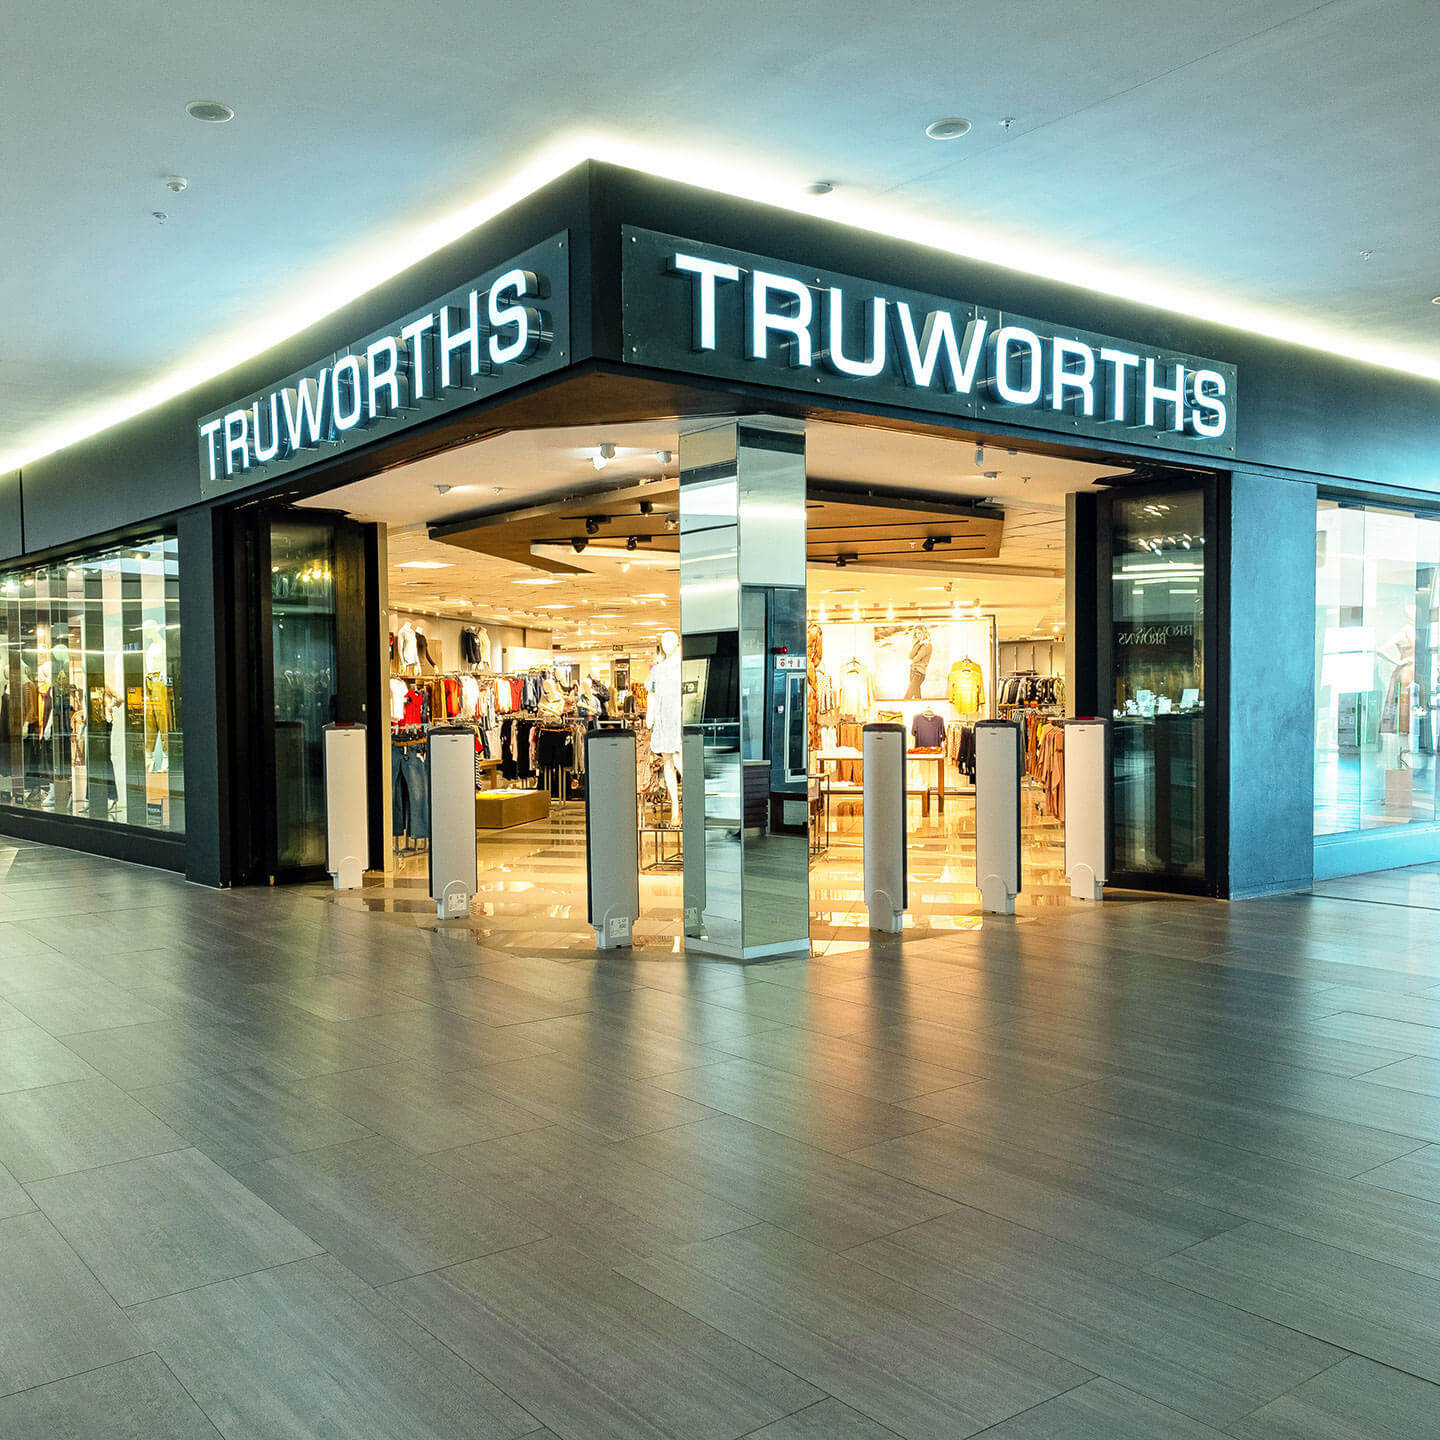 Truworths Fashion - Shop the latest Truworths looks in-store and online at  www.truworths.co.za.